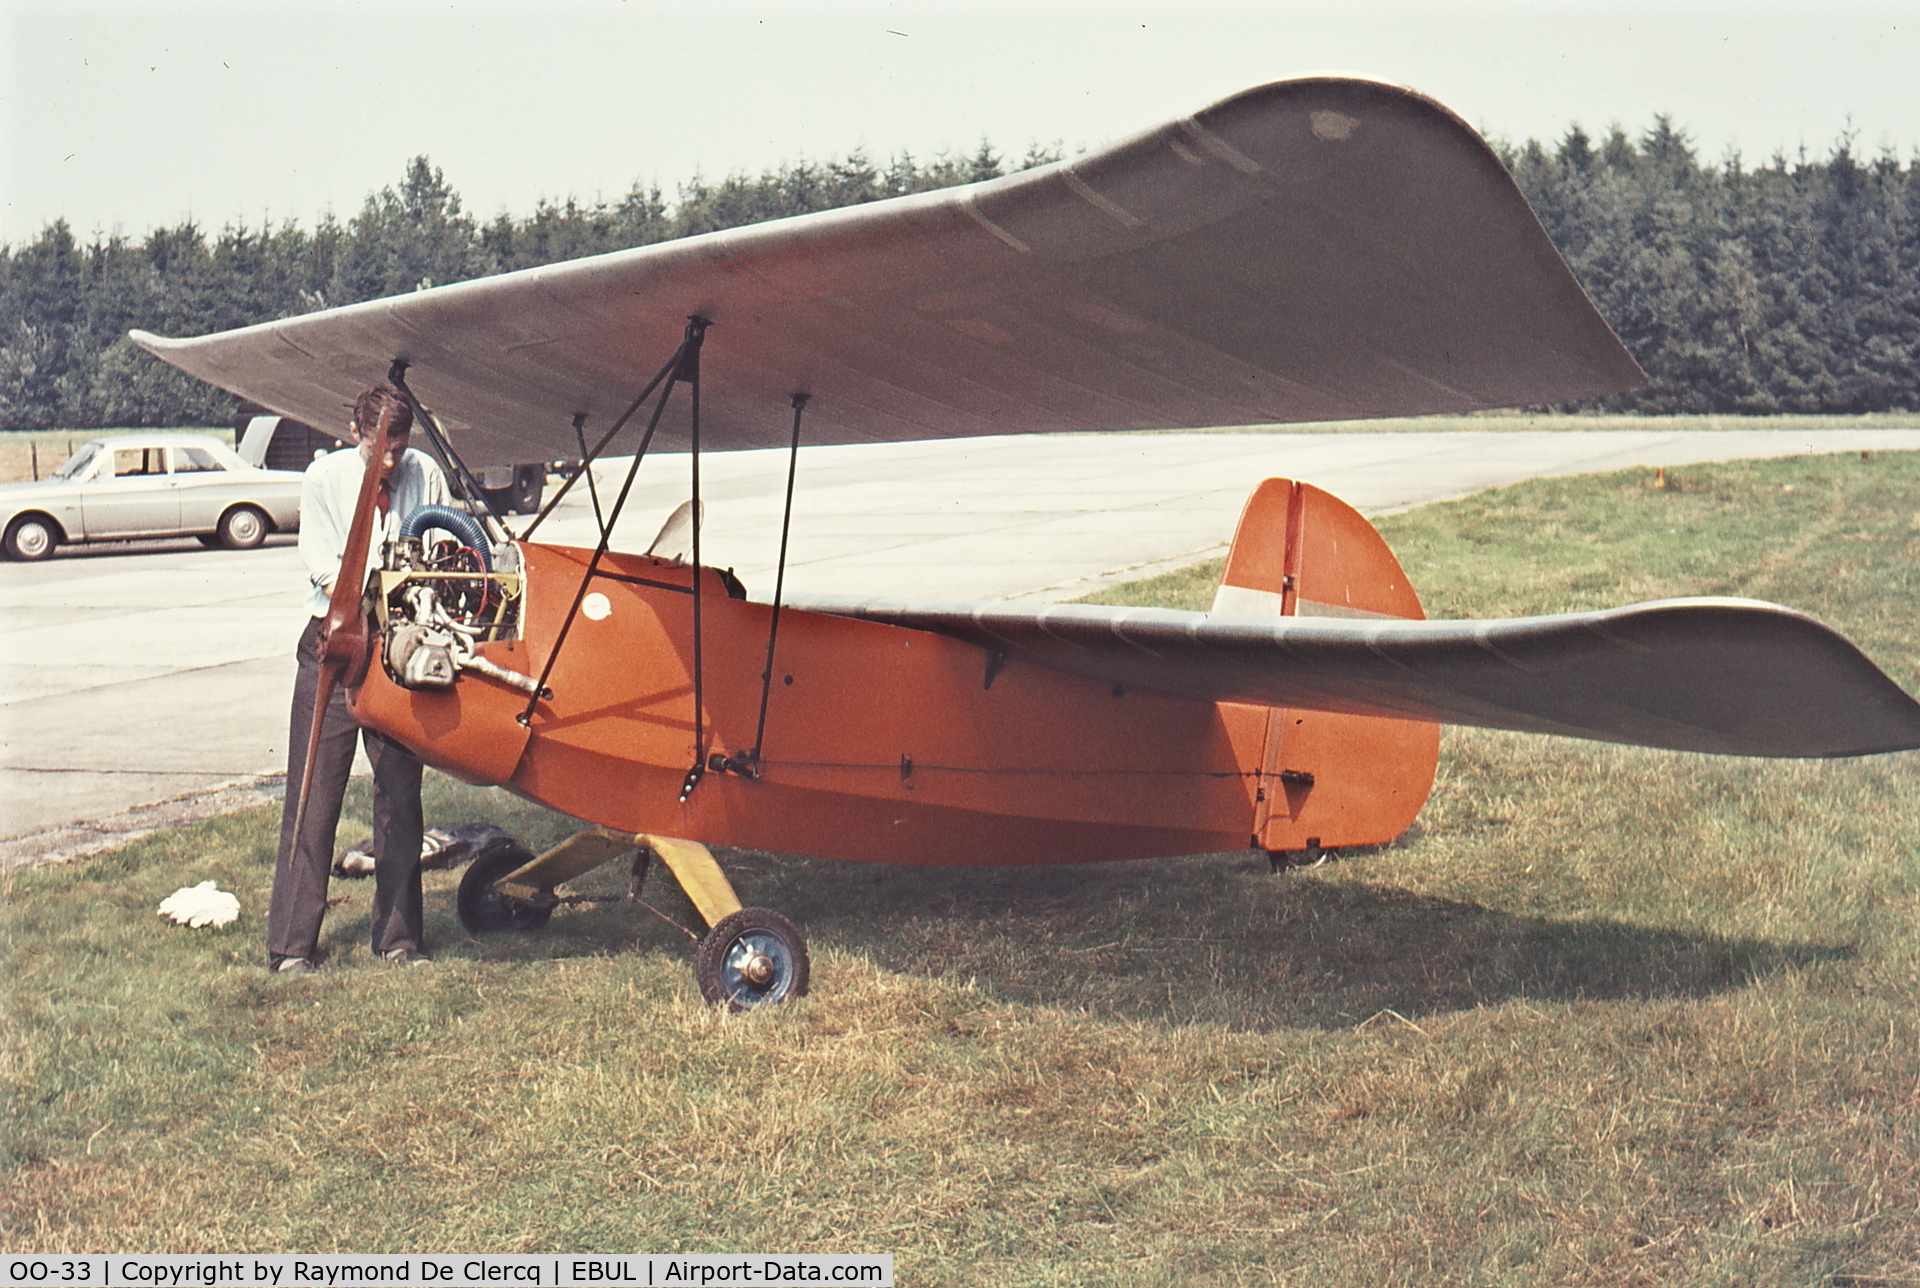 OO-33, Mignet HM.293 Pou-du-Ciel C/N Not found OO-33, With his builder Paul Verplancke at Ursel in the summer of 1970